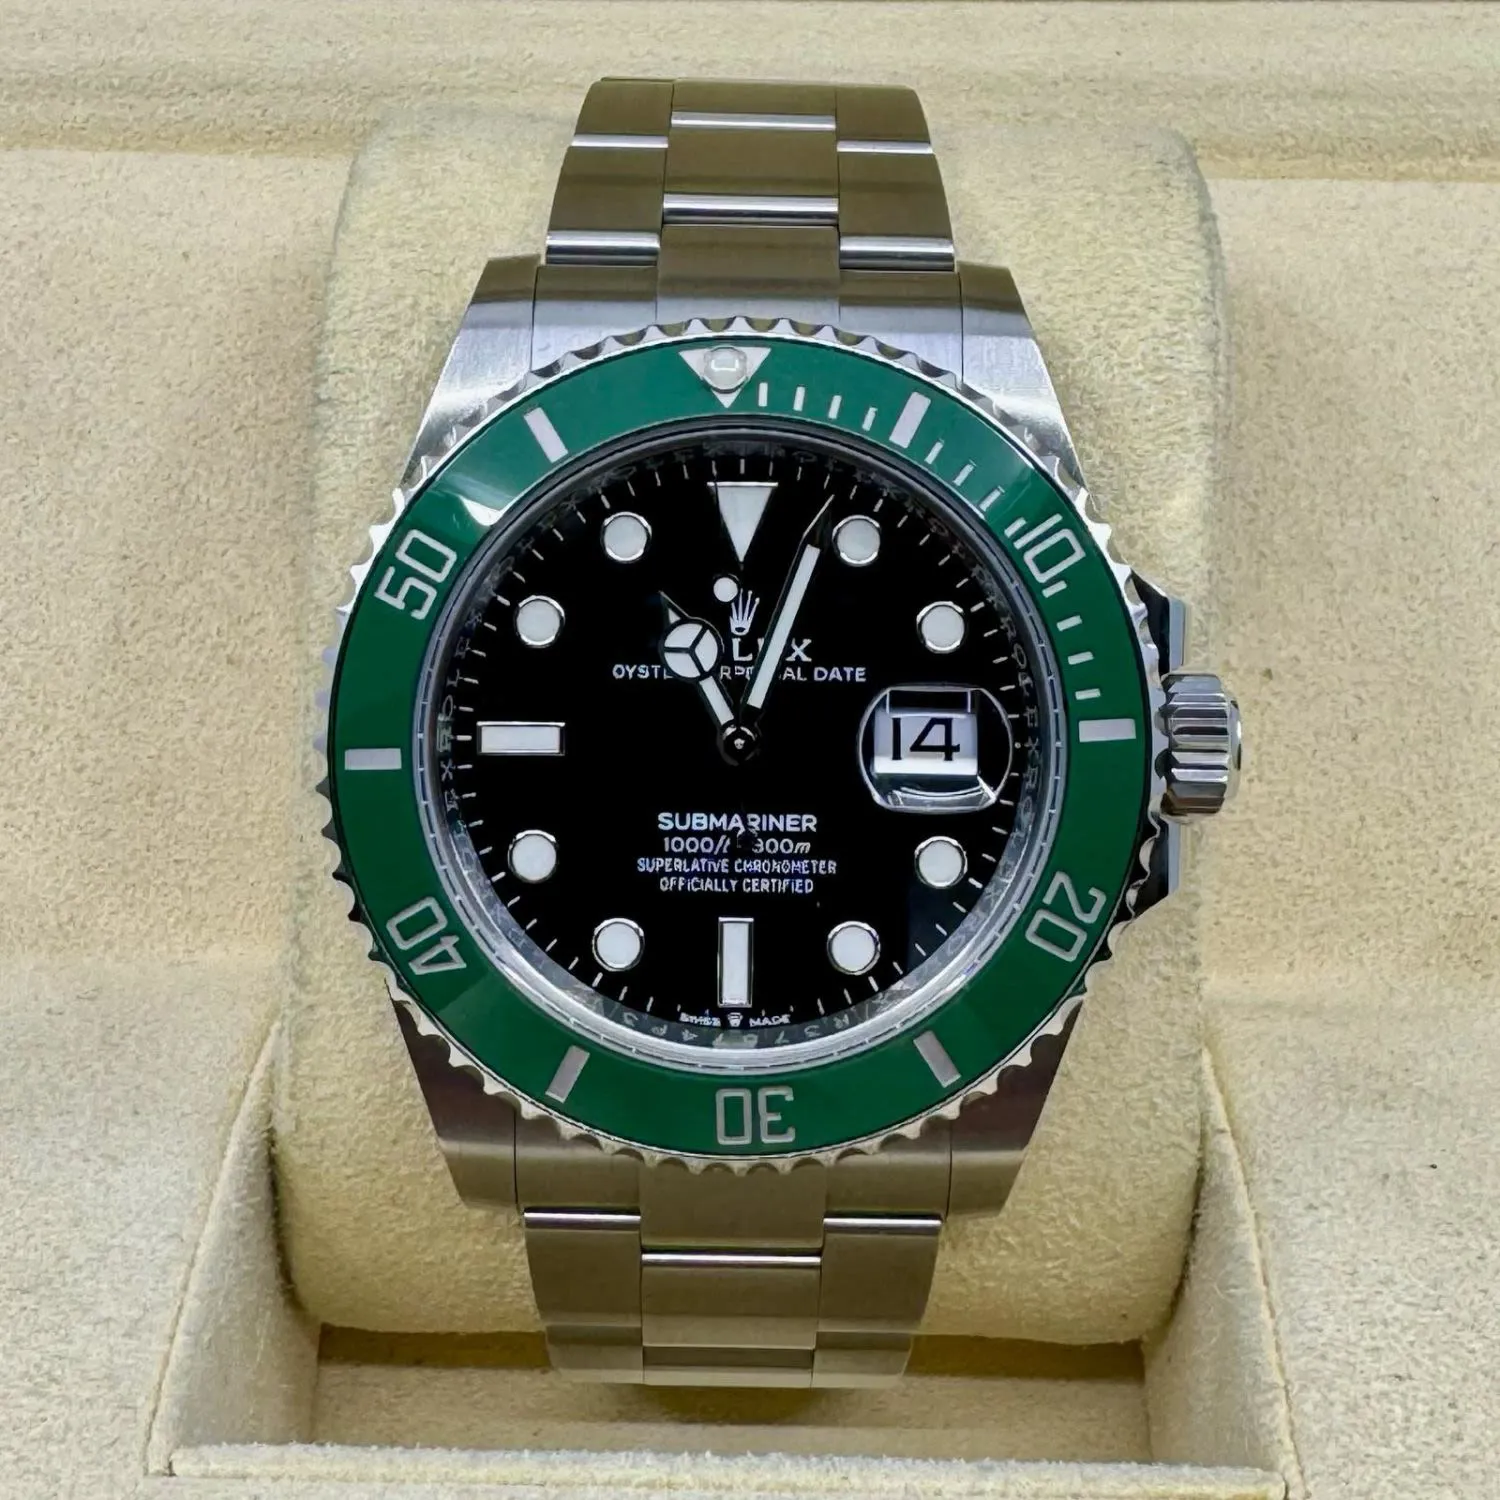 Rolex Submariner Date 1266100LV 41mm Stainless steel and ceramic Black